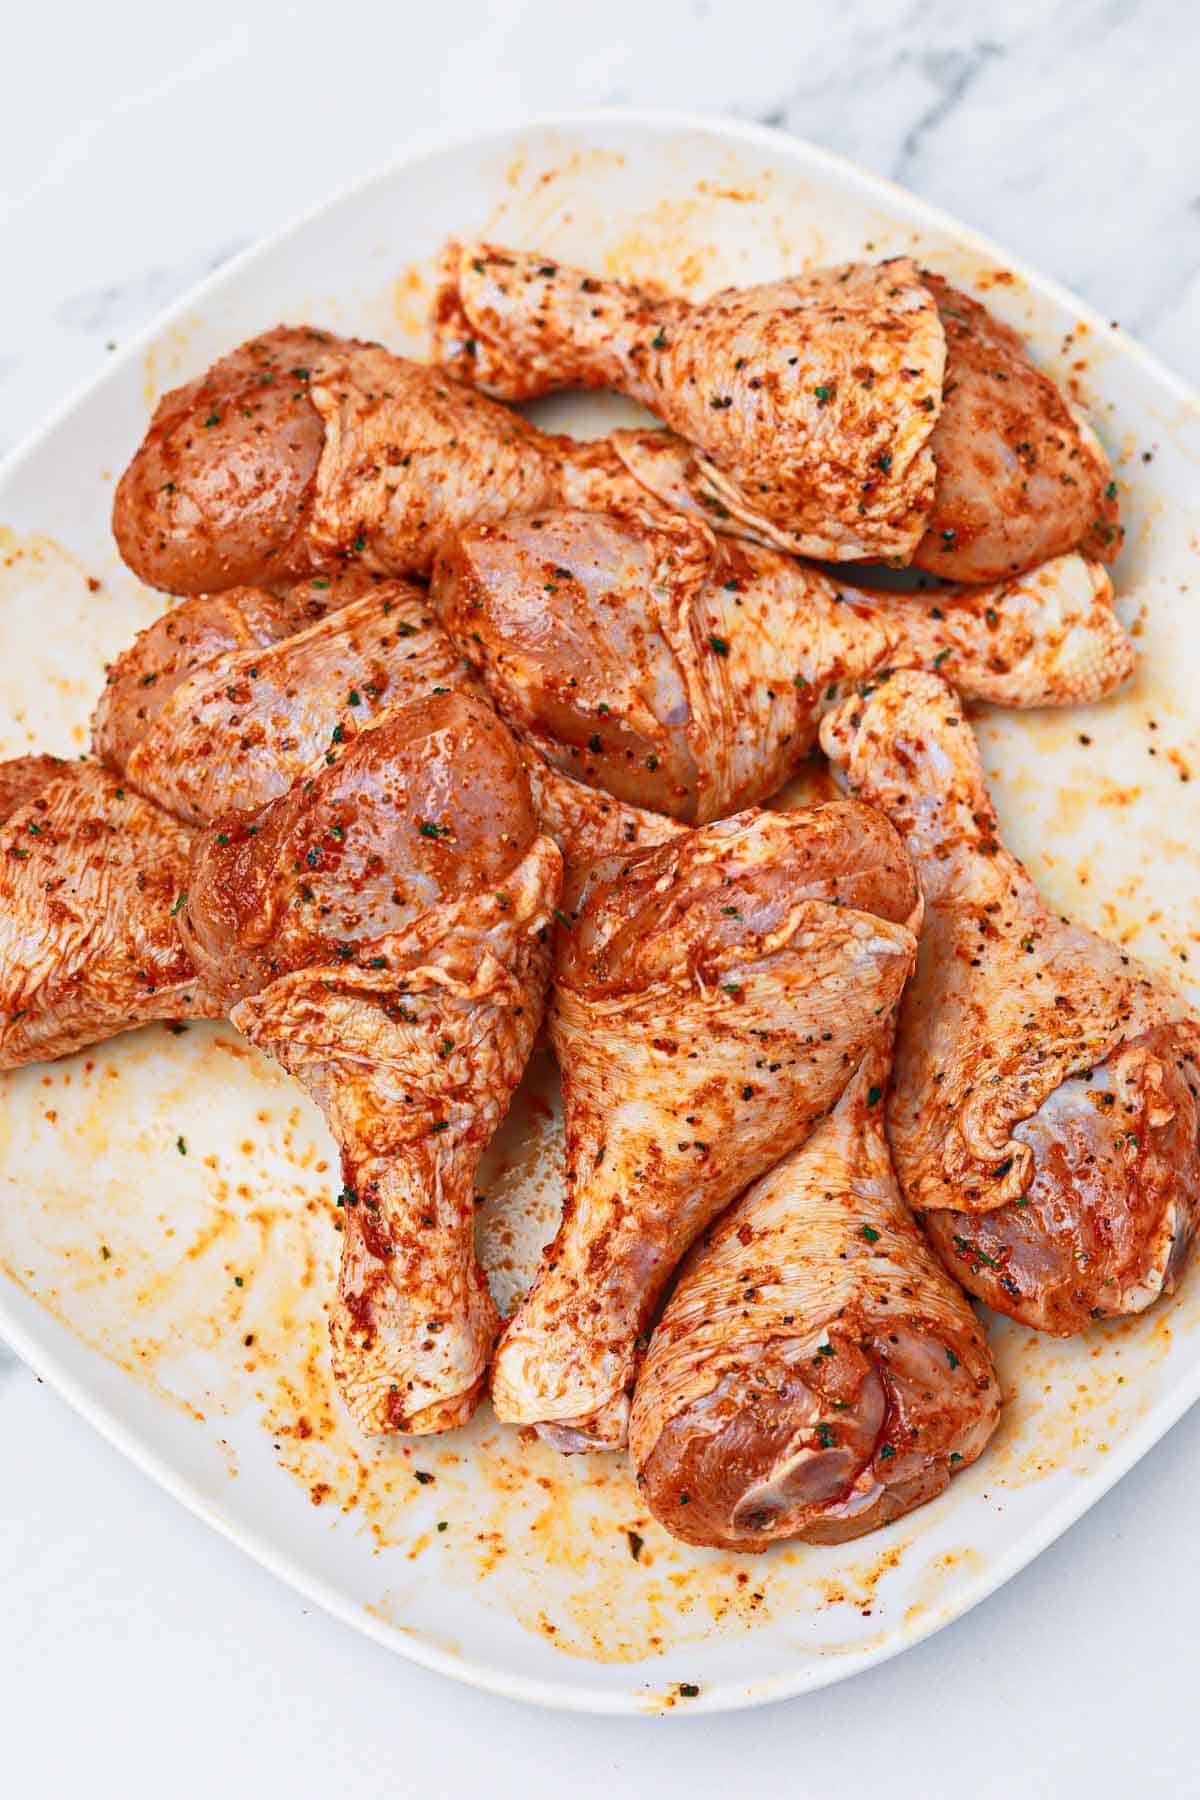 marinated drumsticks on a plate.